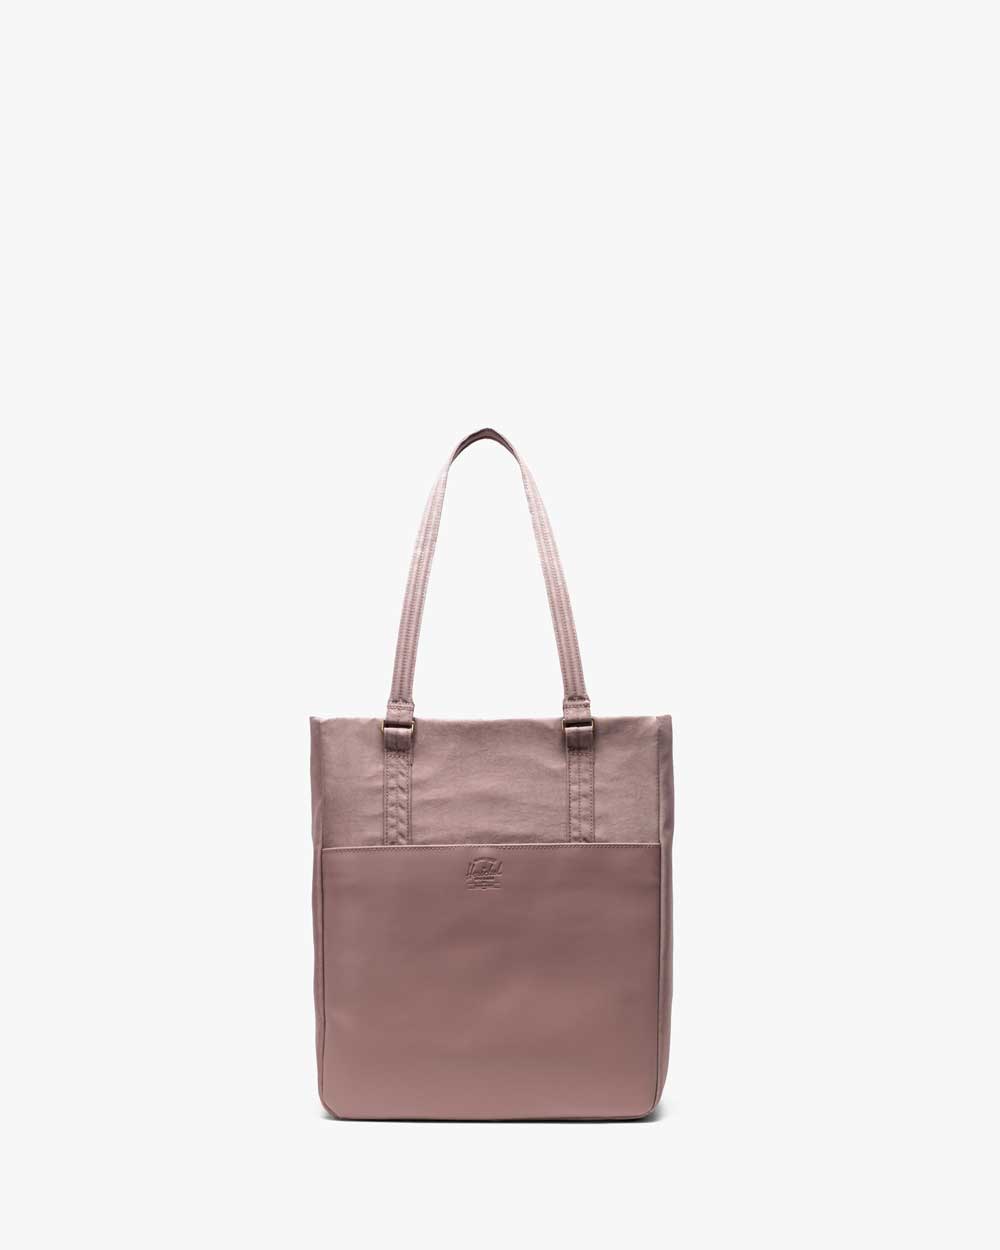 Totes Category